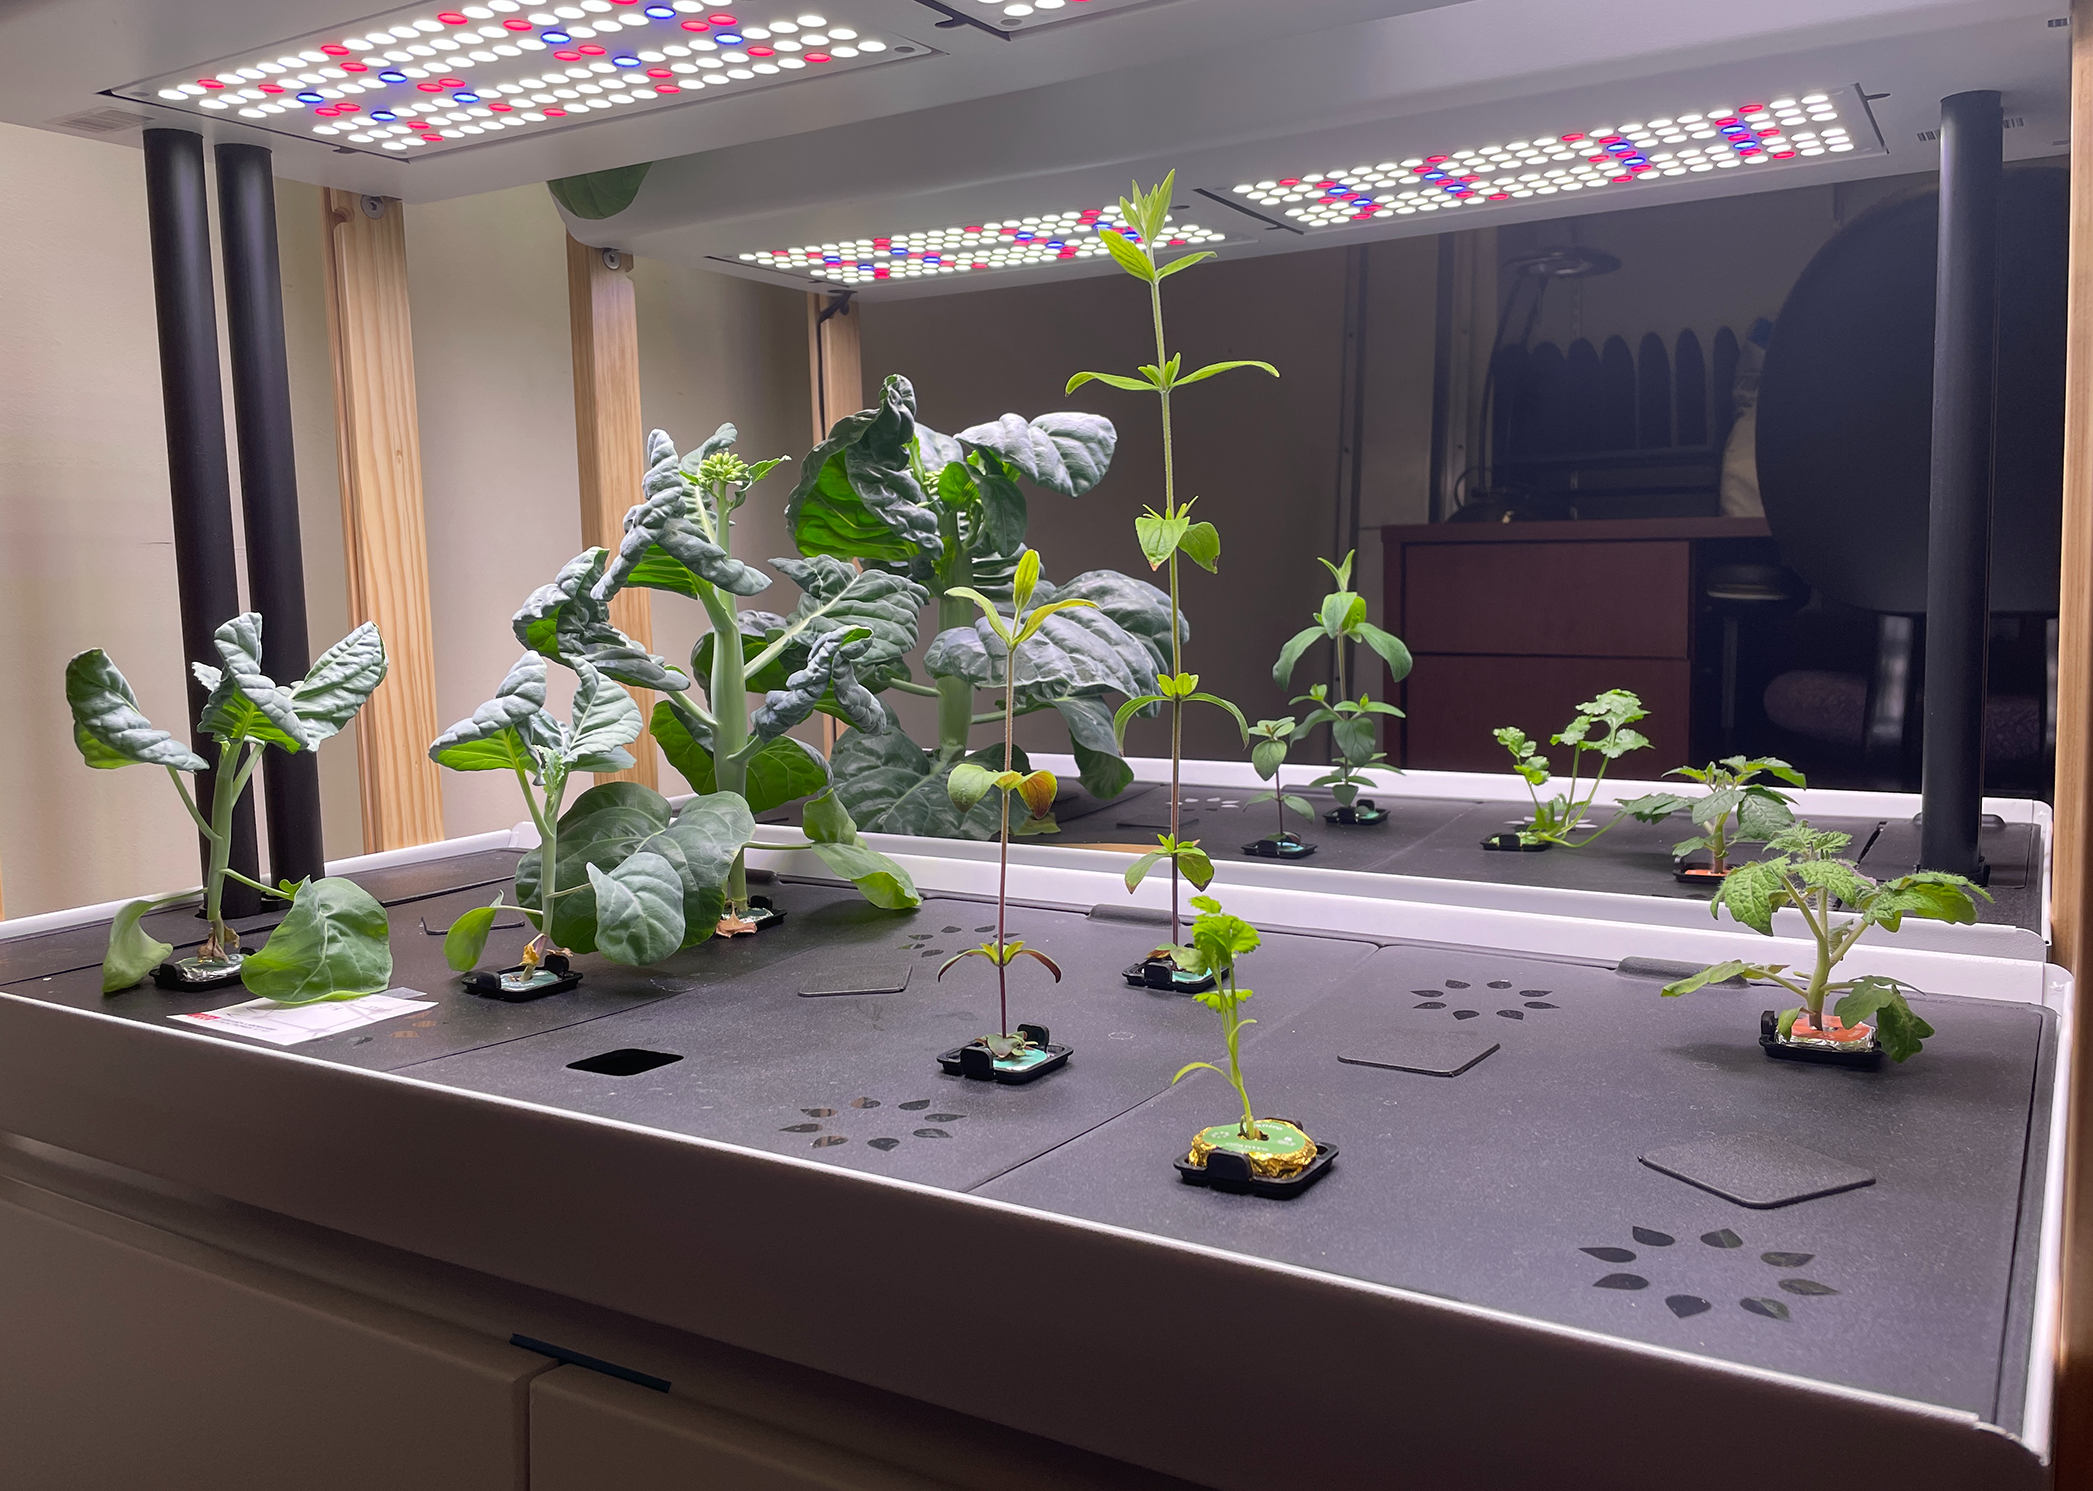 Plants growing in the hydroponic system whose nitrogen uptake they monitor with their novel swept source Raman architecture